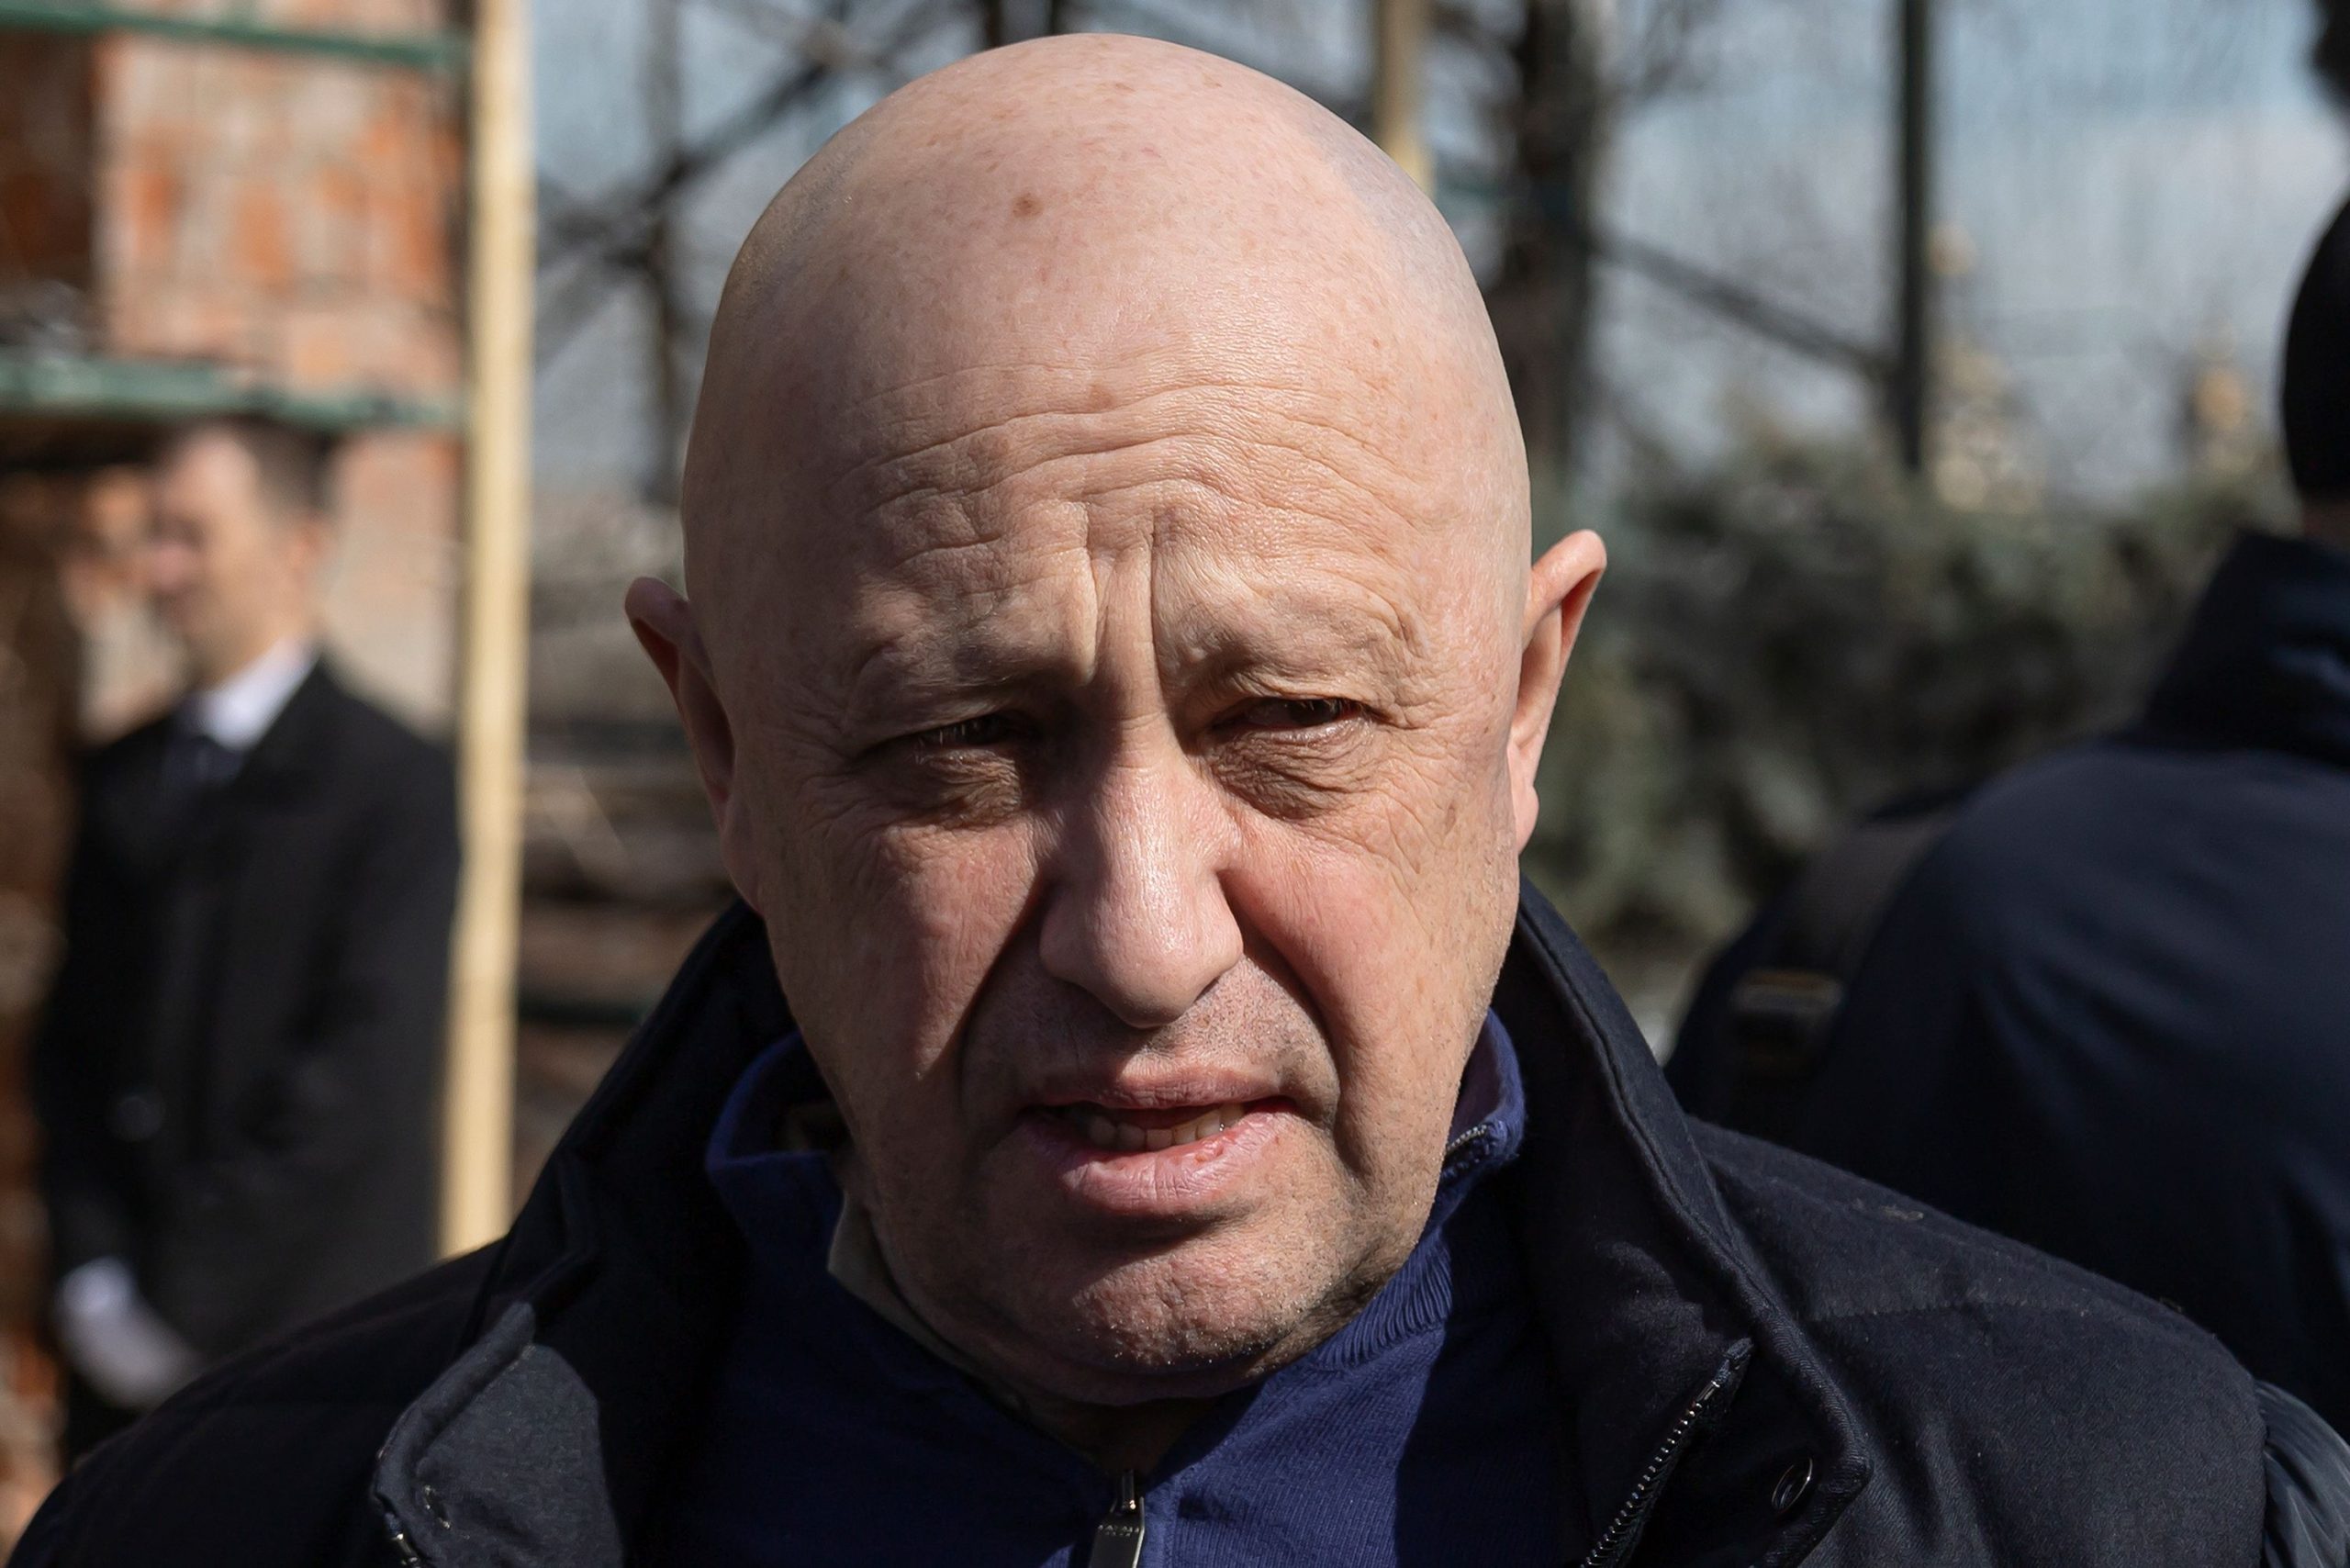 'Wagner leader Yevgeny Prigozhin is alive and plotting his revenge on Putin after body double was killed in plane assassination plot,' Russian analyst claims